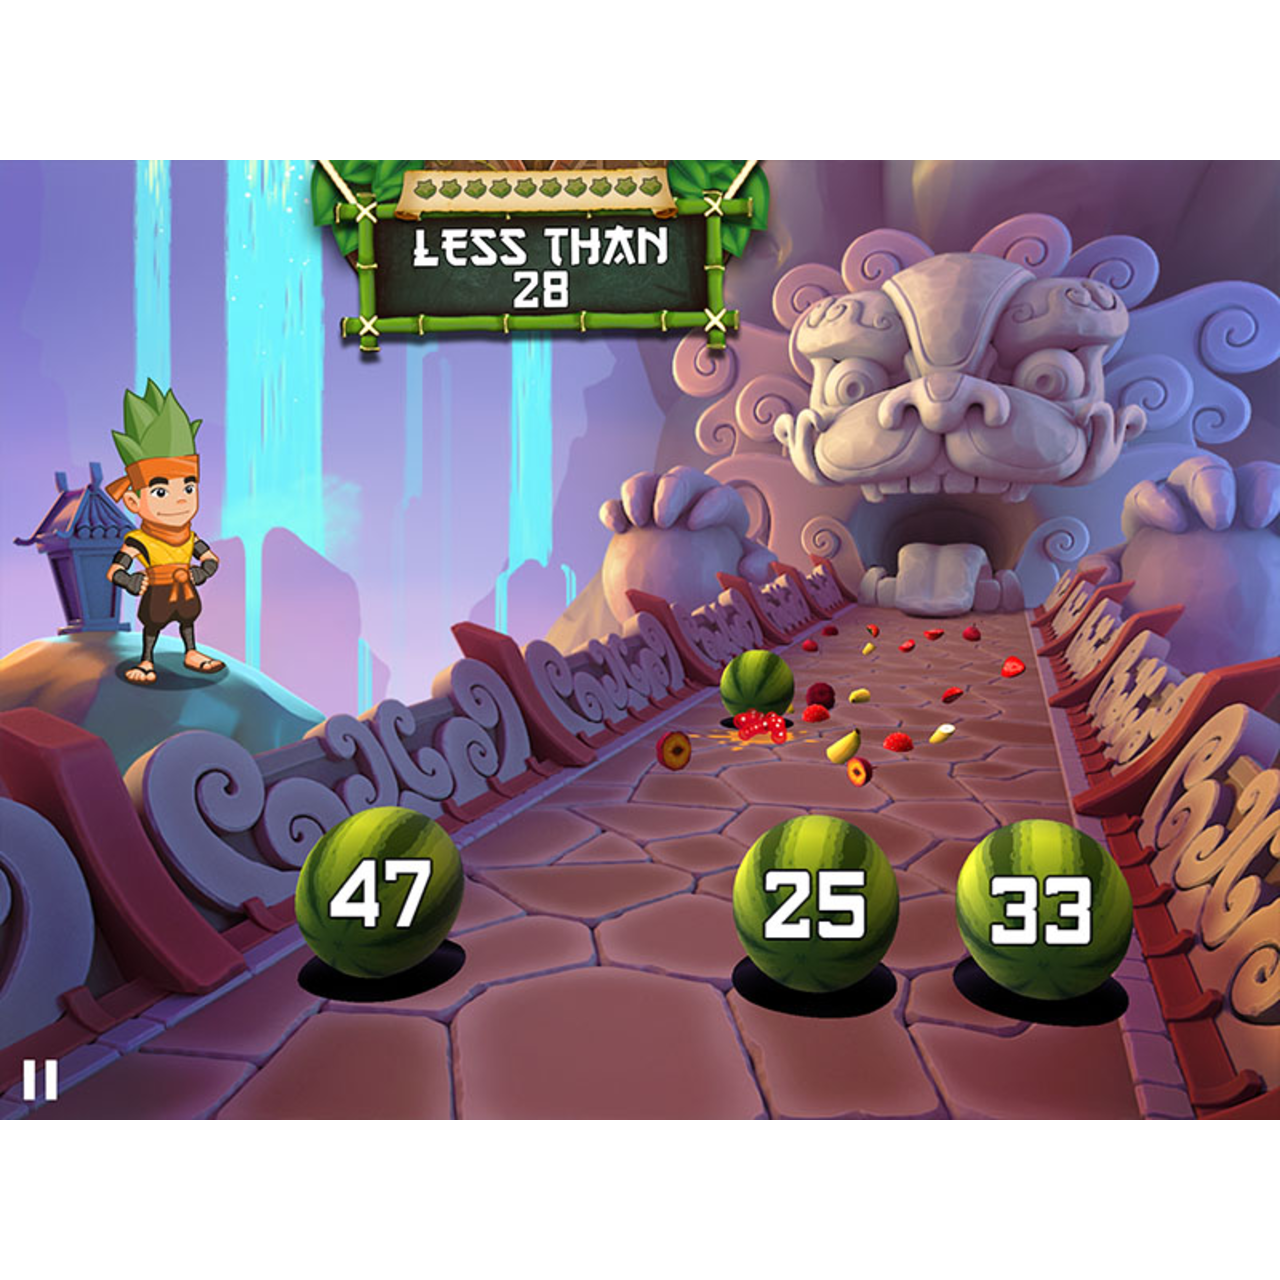 Fruit Ninja on its way to Android Tomorrow - Droid Gamers